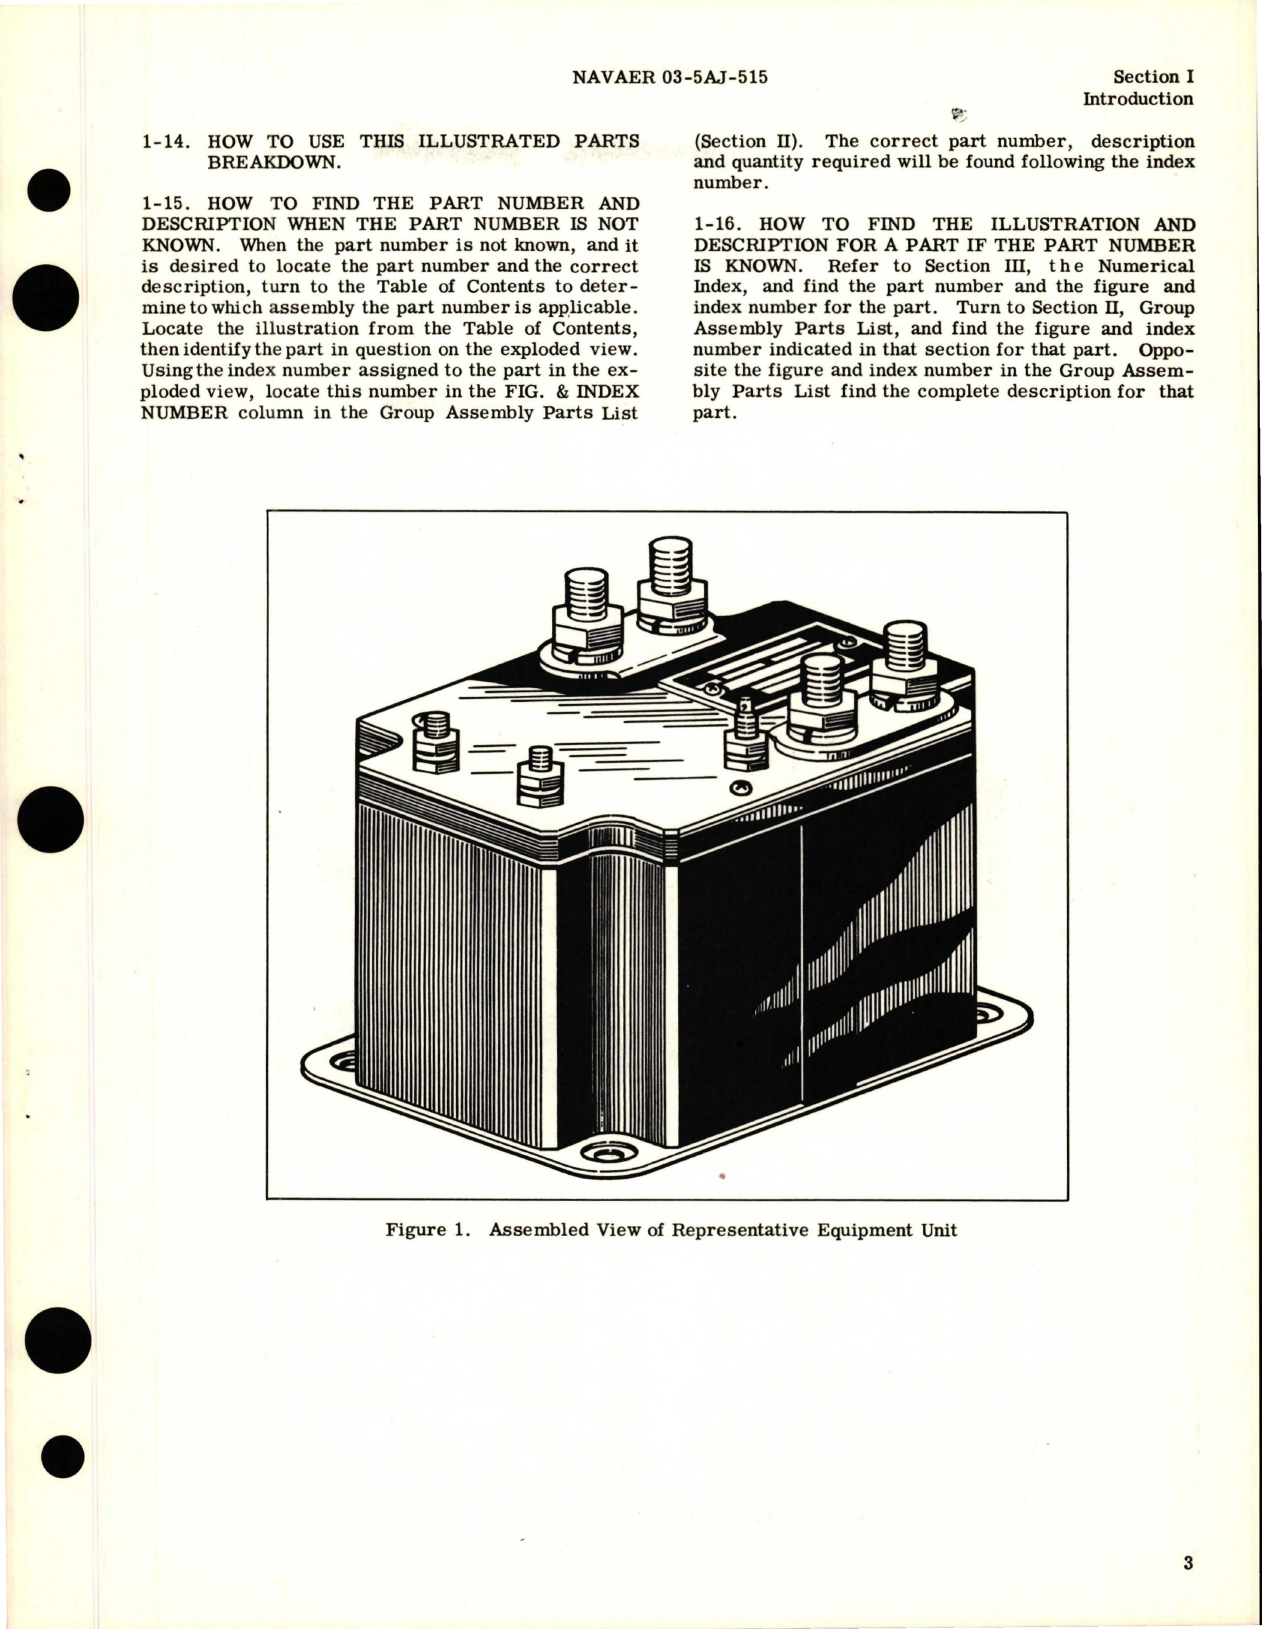 Sample page 5 from AirCorps Library document: Illustrated Parts Breakdown for Solenoid Relay - Part A-792 and A-792KB